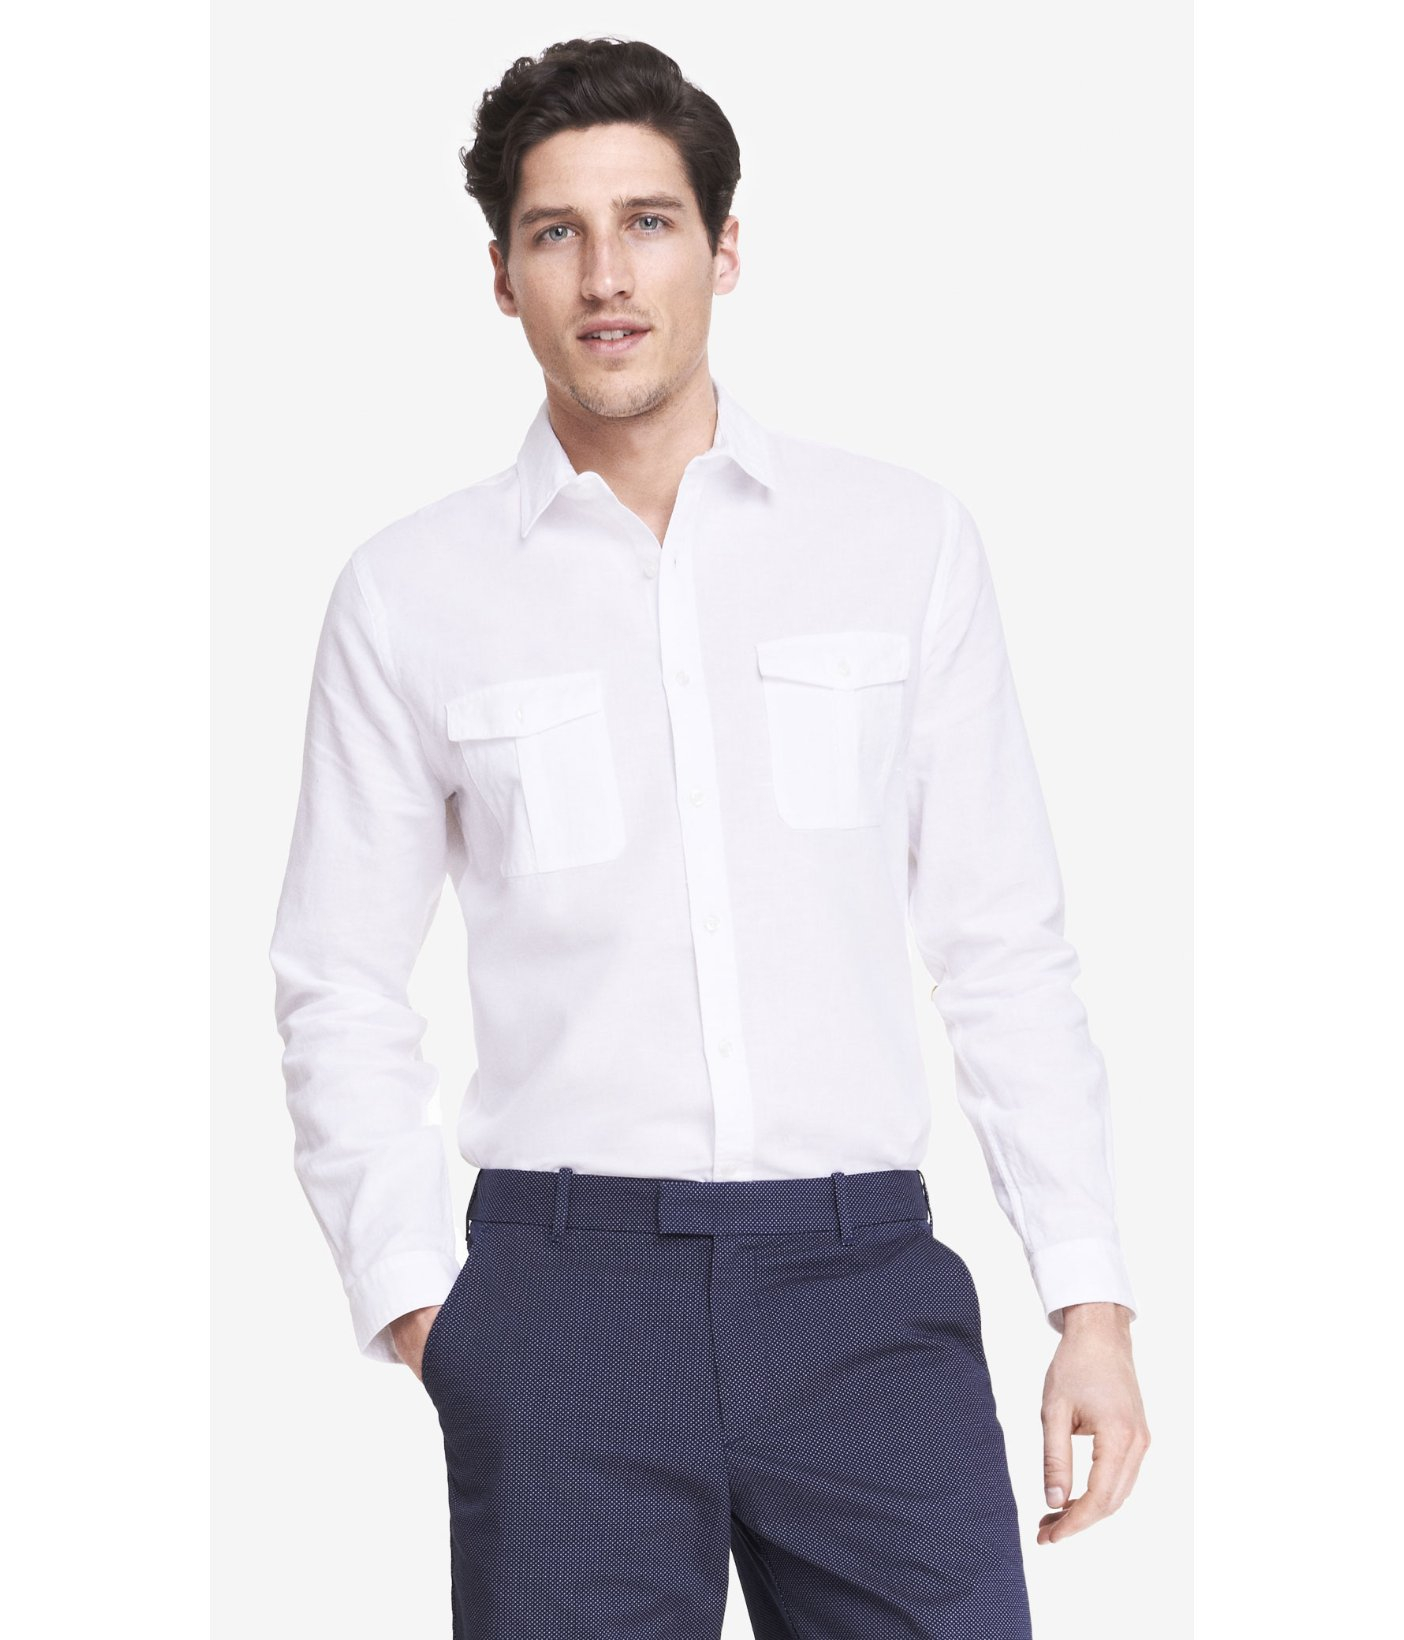 Express Linen-Cotton Two Pocket Shirt in White for Men - Lyst